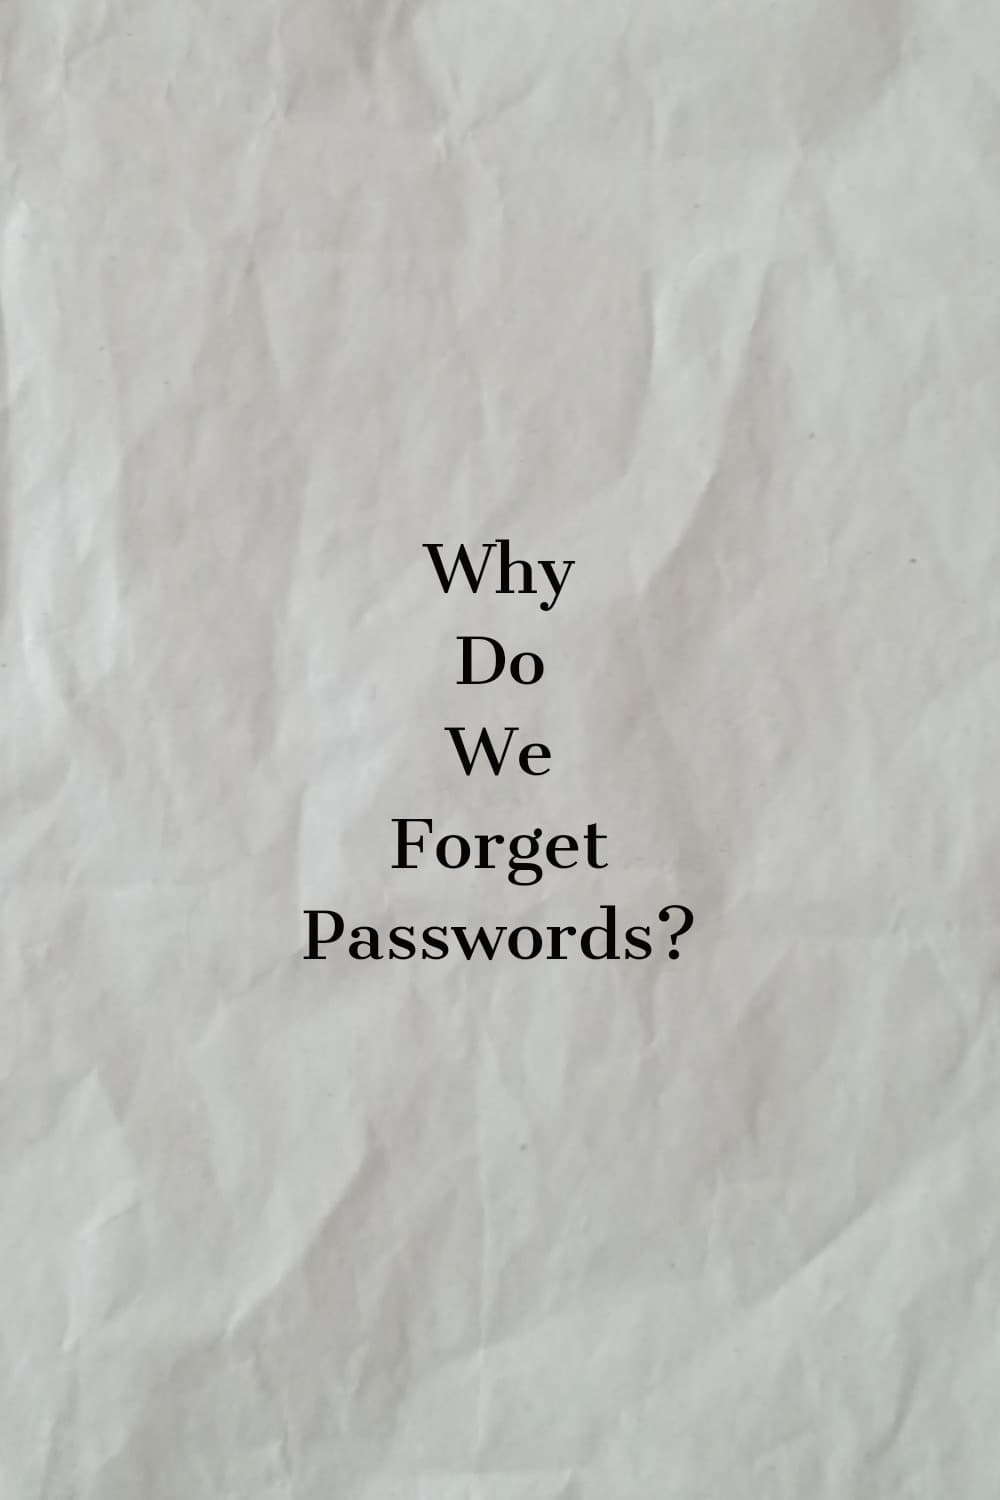 Why Do We Forget Passwords?